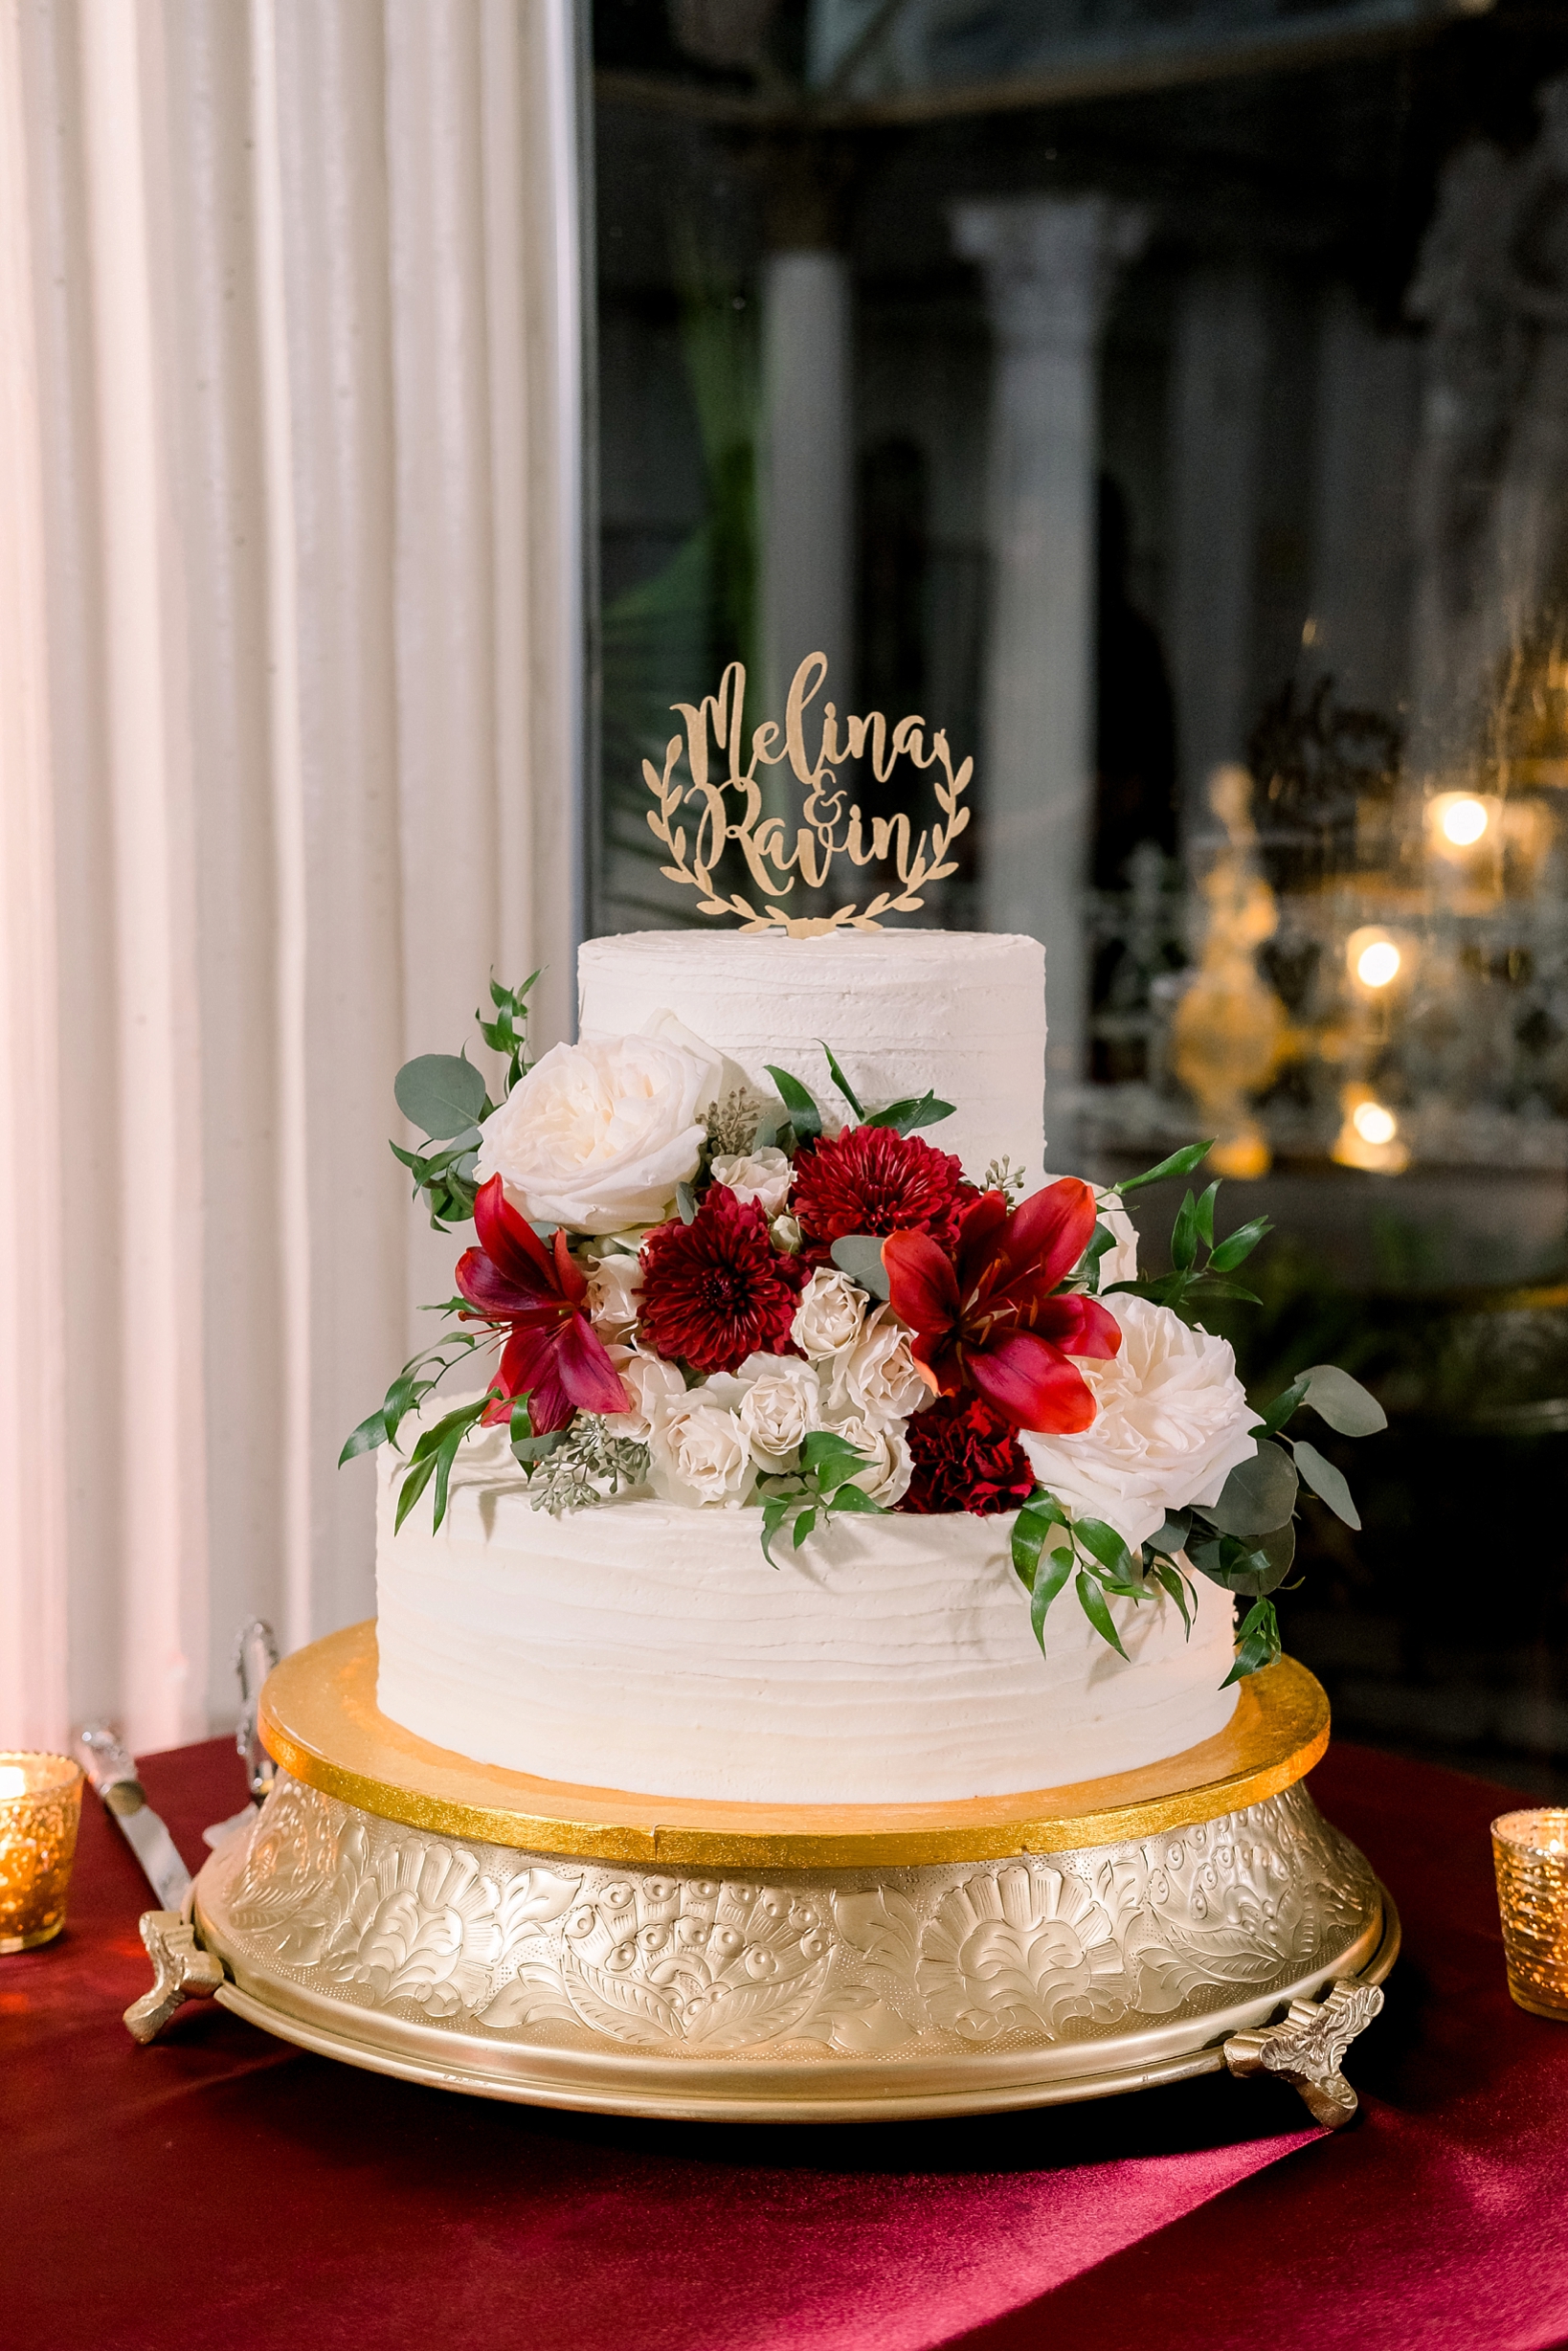 The simple yet luxurious wedding cake covered in full florals and greenery by Sarah & Ben Photography